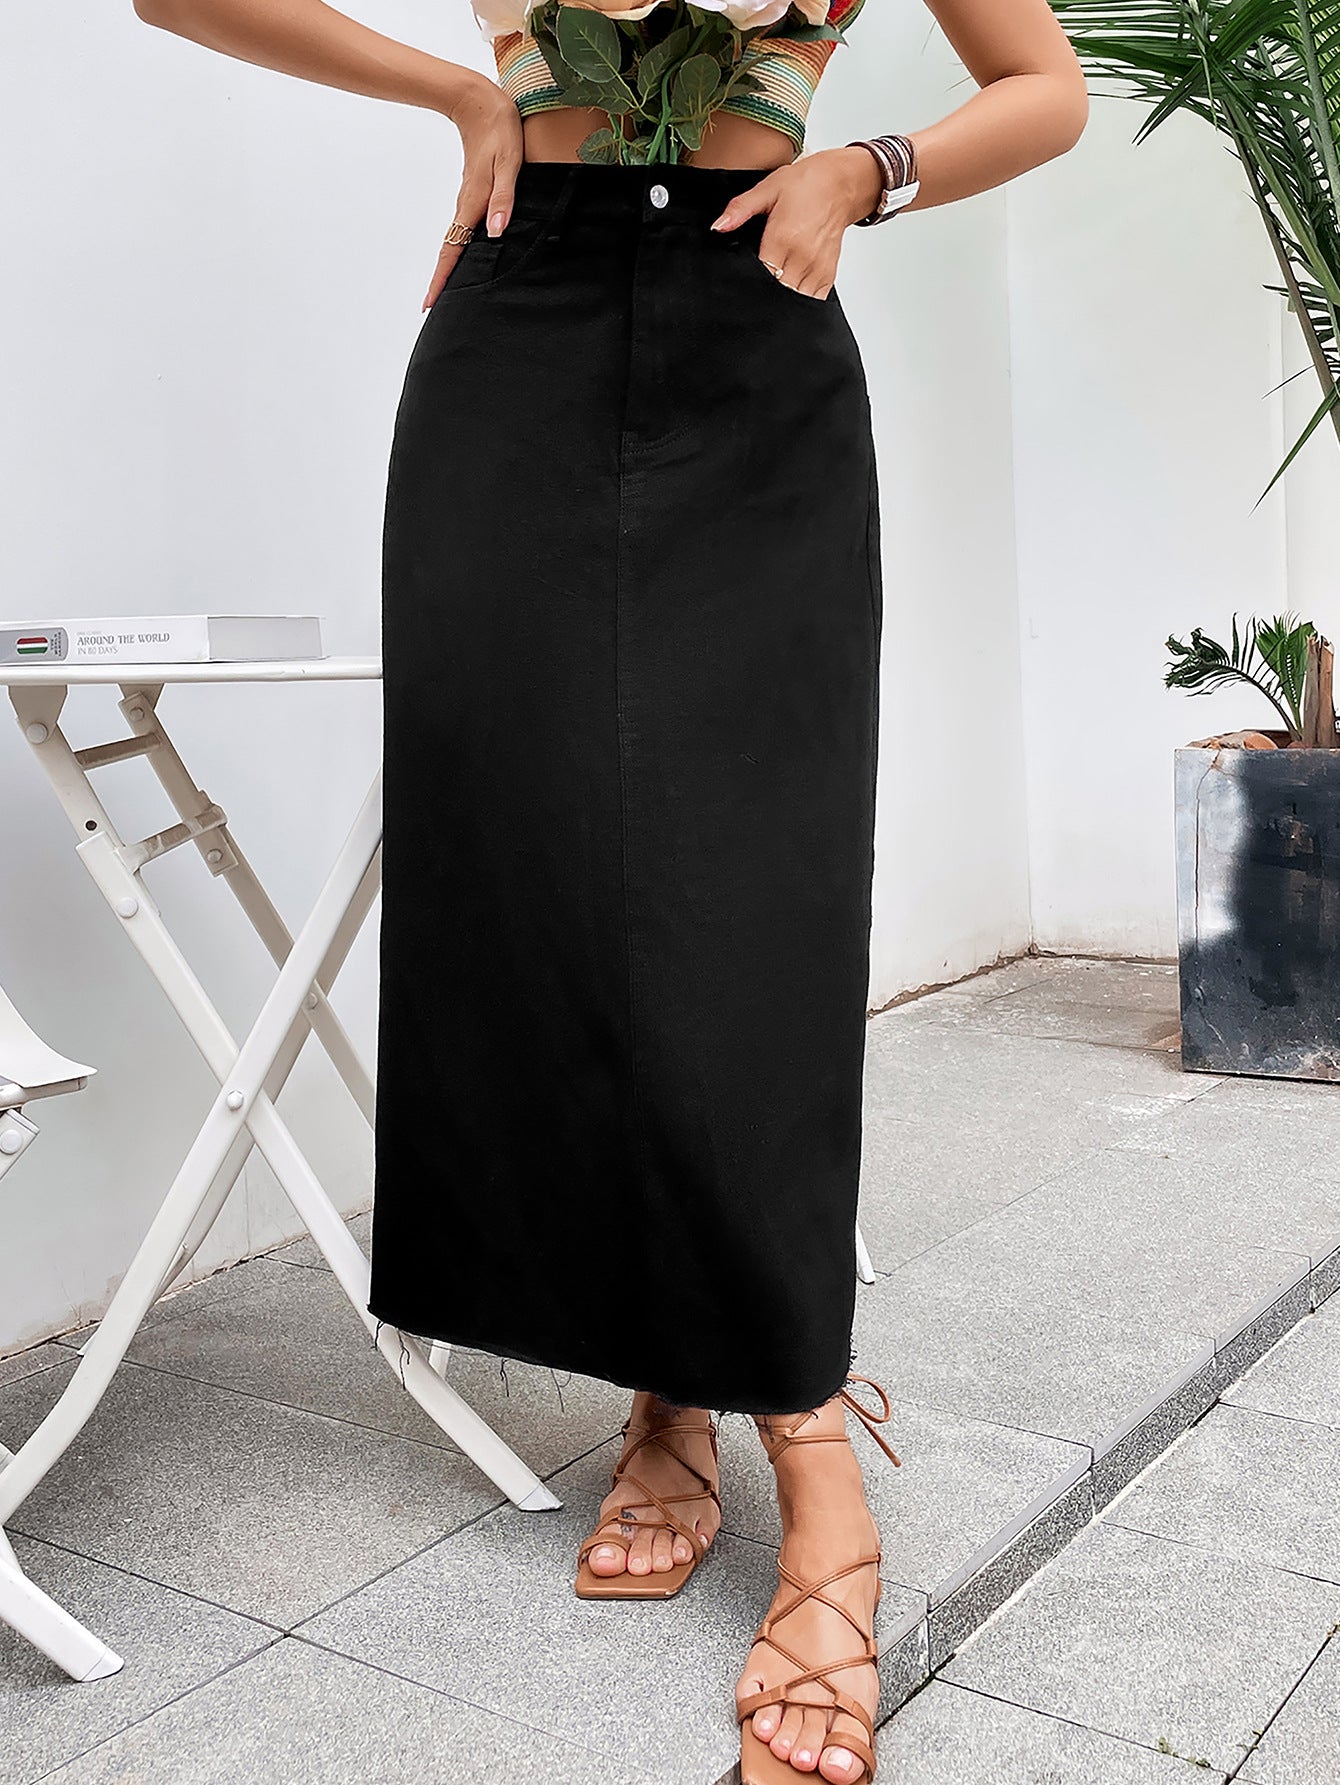 Women's Spring Summer Trendy Casual All-matching Fashion Long Skirt